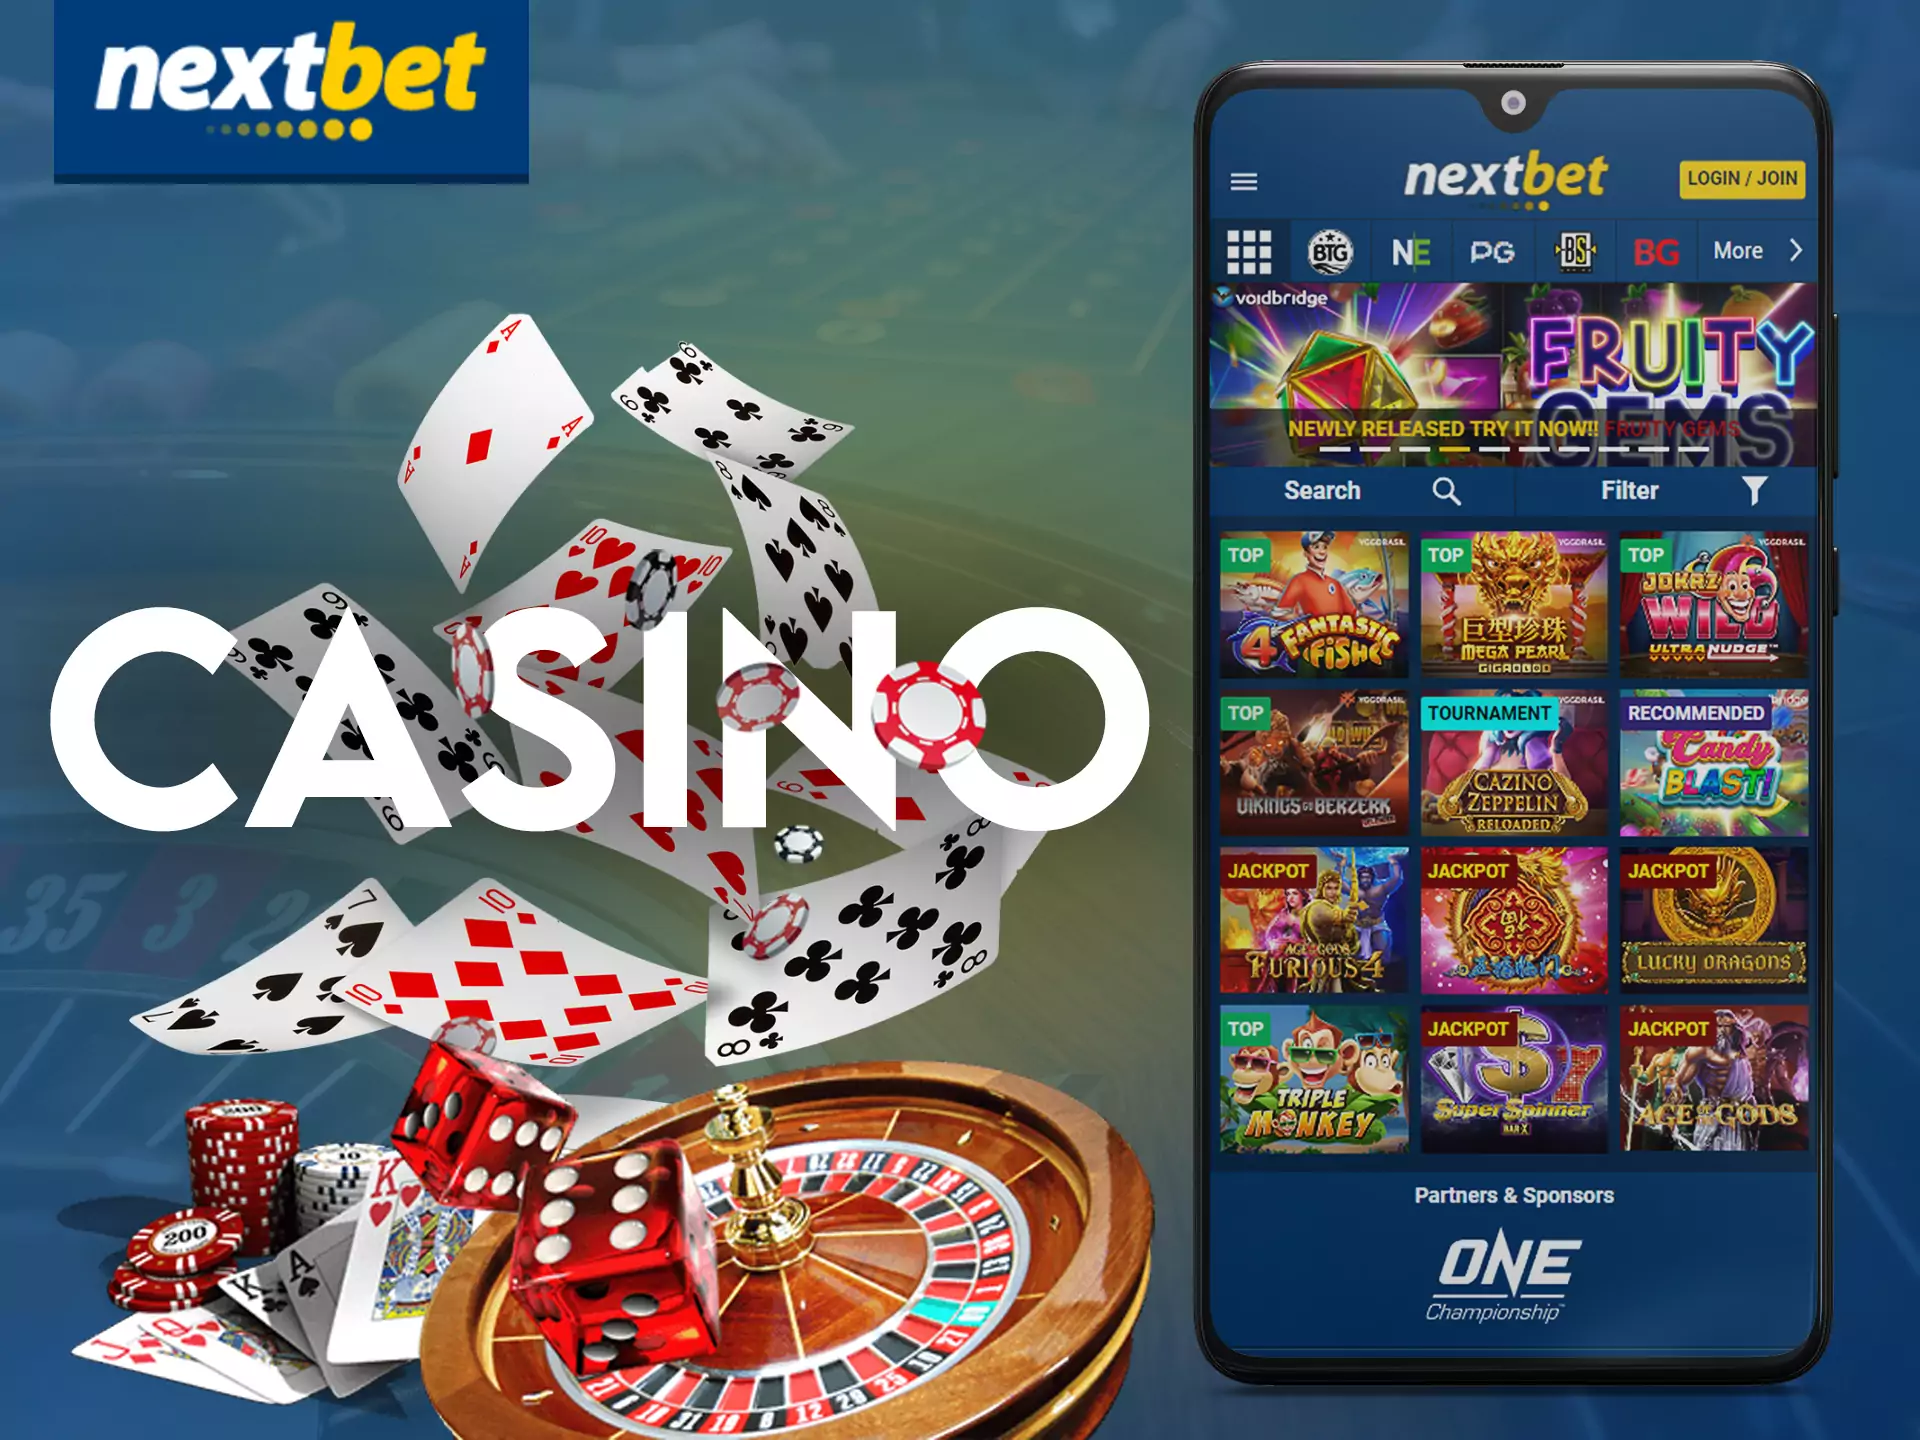 Play at the casino in the Nextbet app, place bets and enjoy the game.